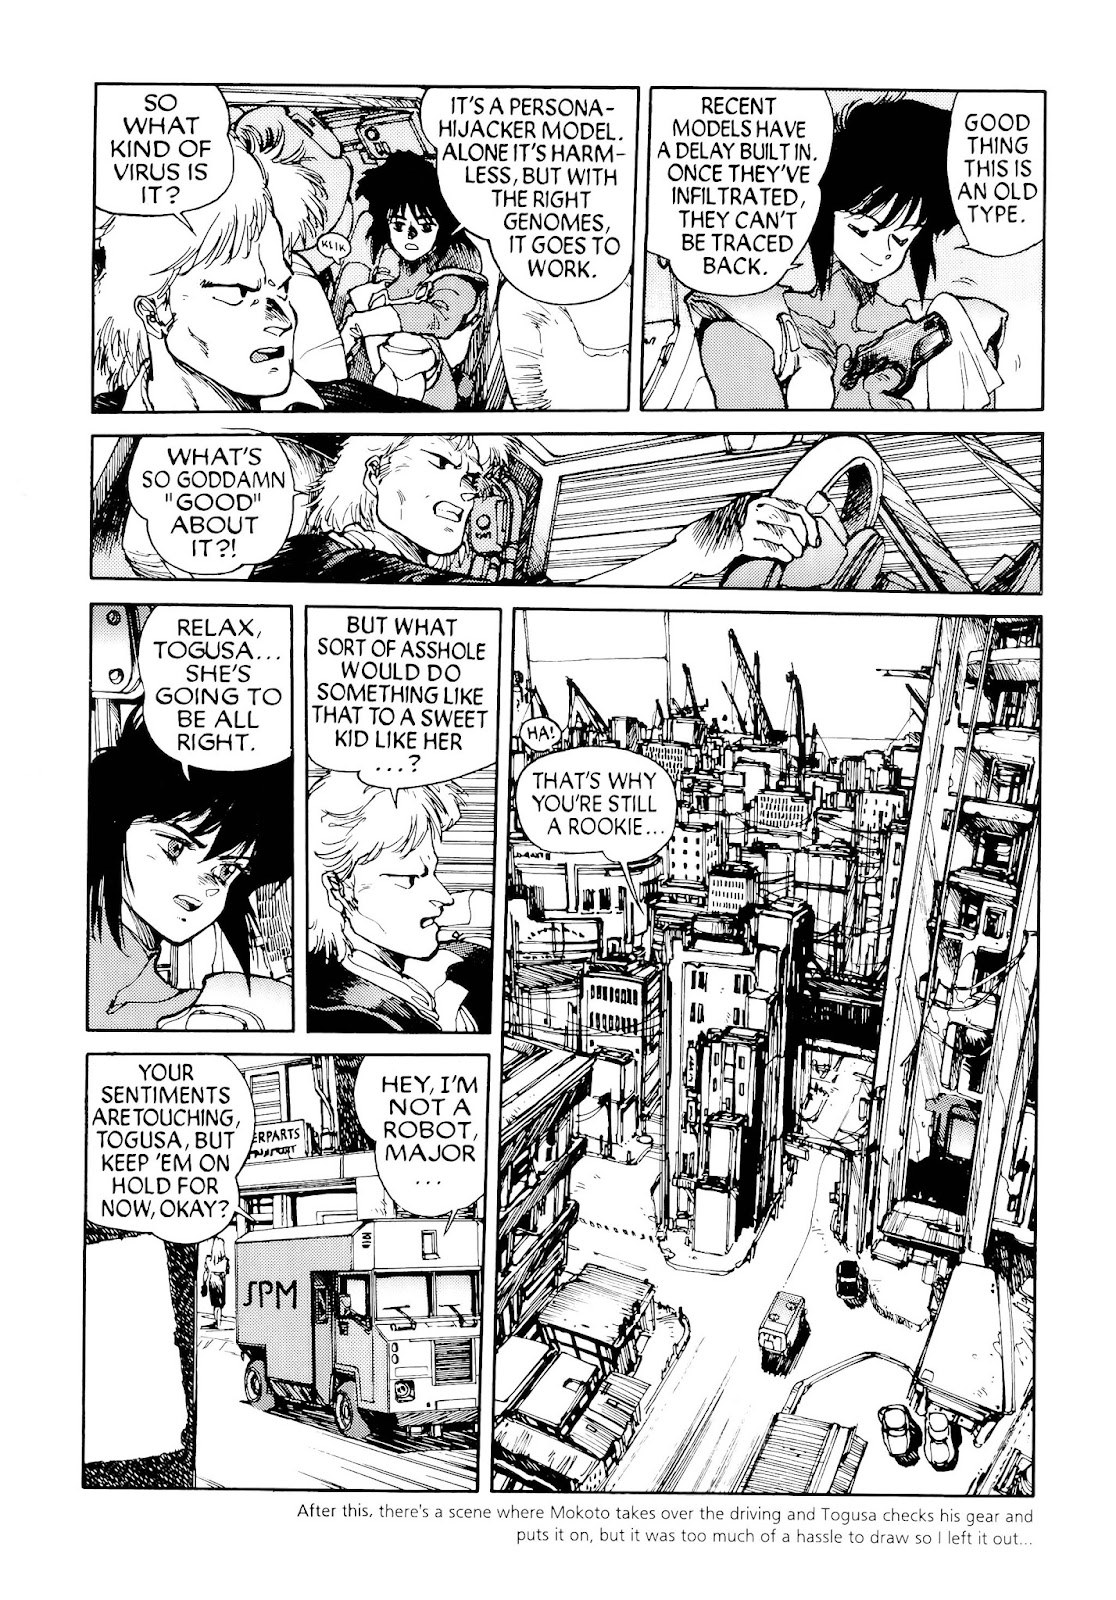 Shirow fills a page (with text)